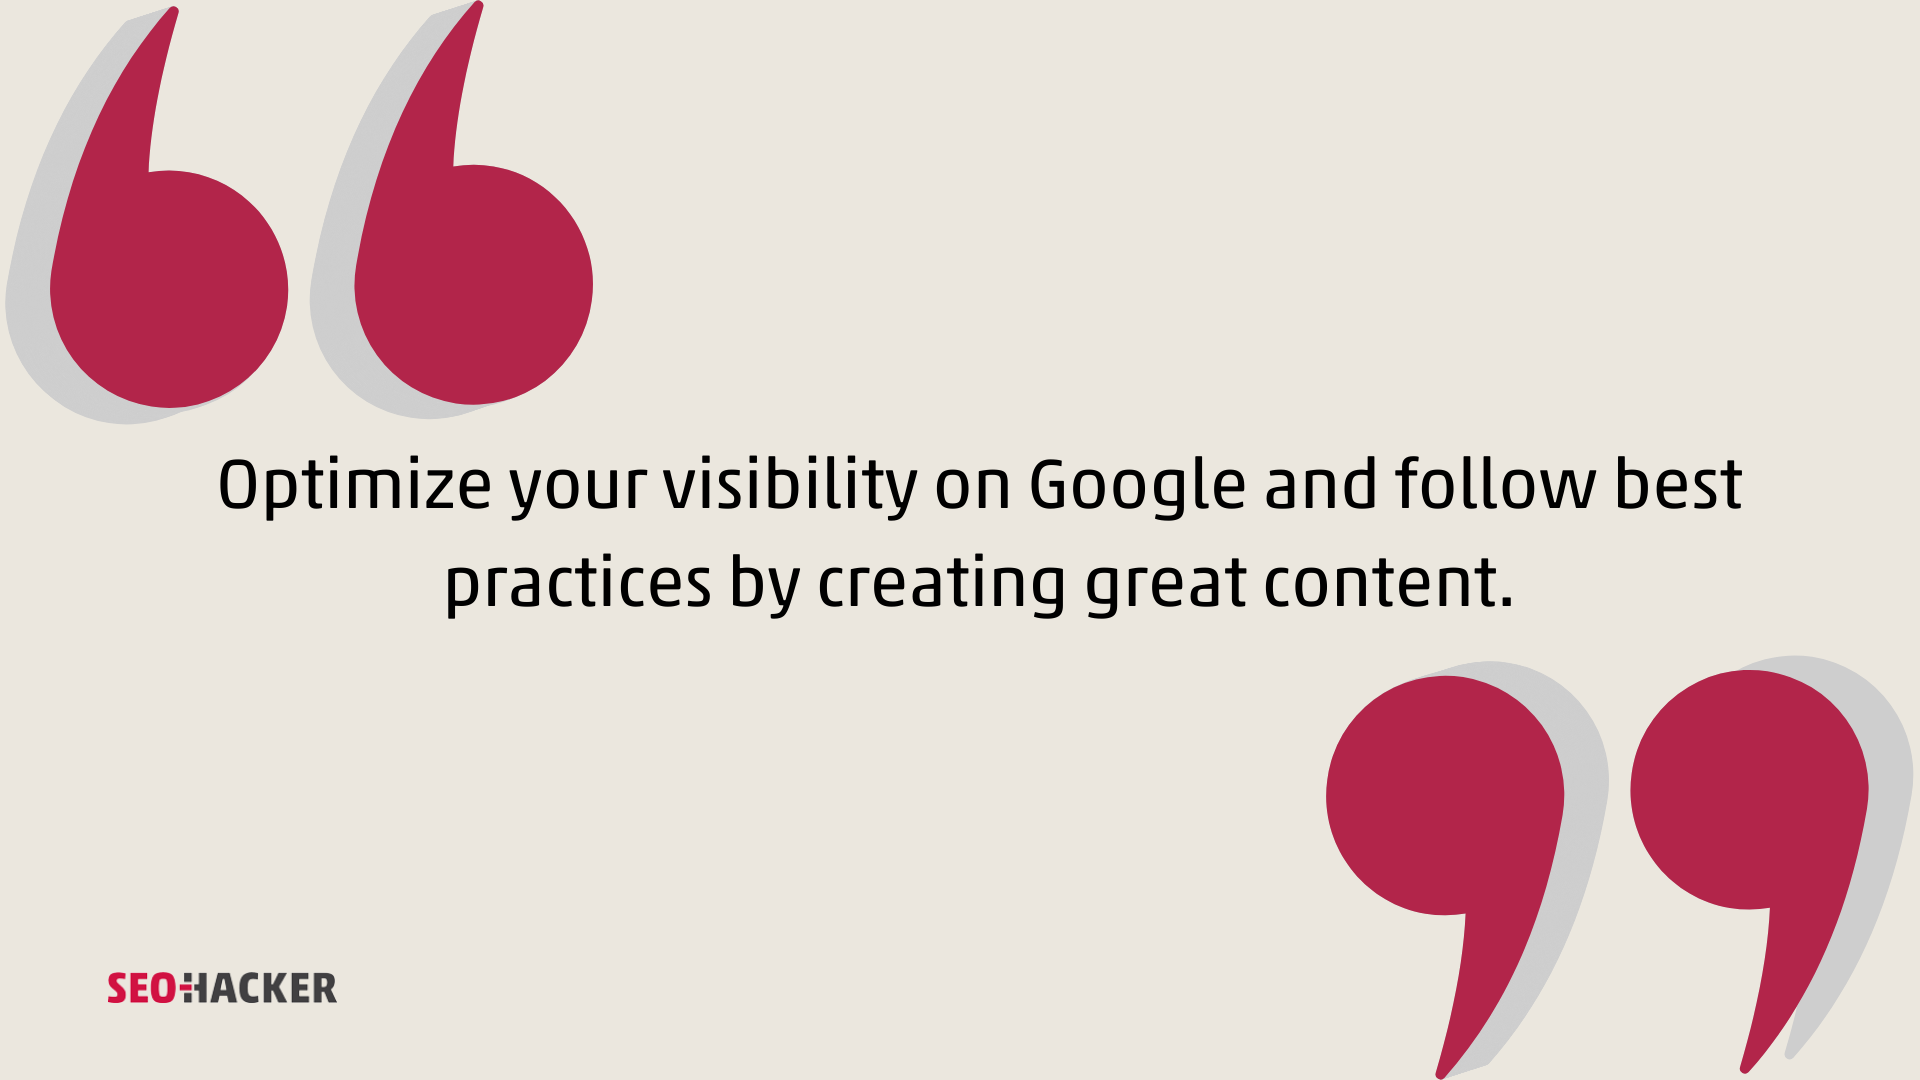 Quote Card on Google Visibility